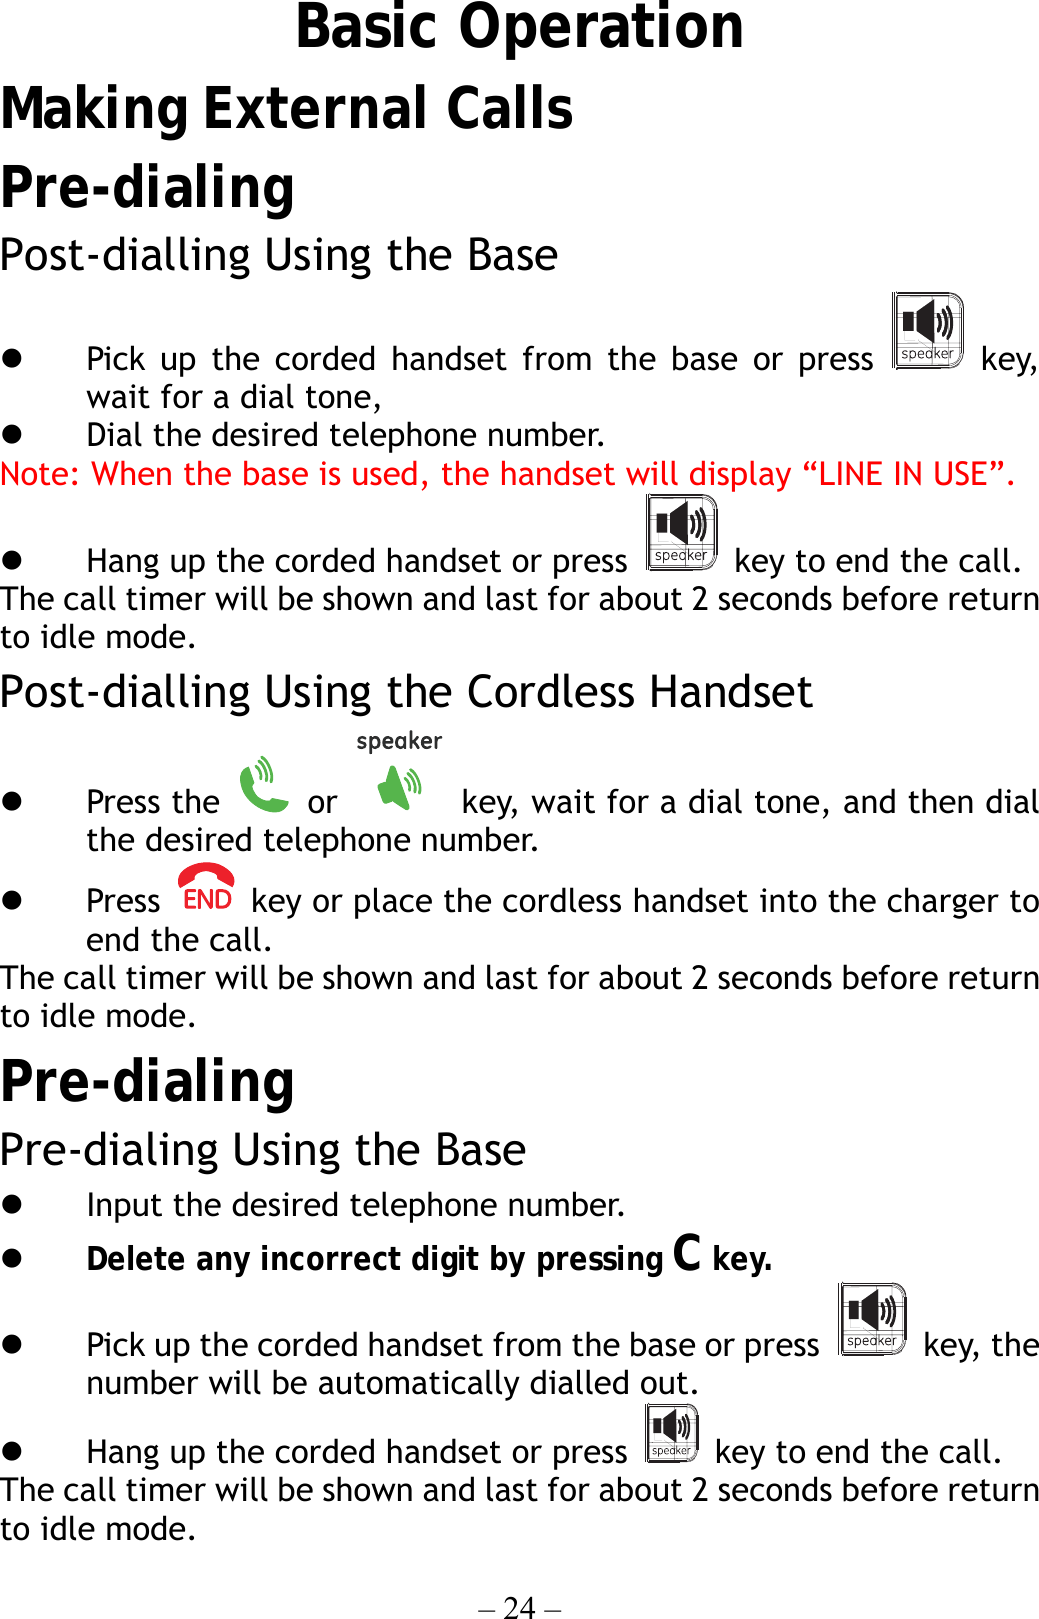 – 24 – Basic Operation Making External Calls Pre-dialing Post-dialling Using the Base   Pick up the corded handset from the base or press   key, wait for a dial tone,     Dial the desired telephone number. Note: When the base is used, the handset will display “LINE IN USE”.   Hang up the corded handset or press    key to end the call. The call timer will be shown and last for about 2 seconds before return to idle mode. Post-dialling Using the Cordless Handset   Press the   or    key, wait for a dial tone, and then dial the desired telephone number.   Press    key or place the cordless handset into the charger to end the call. The call timer will be shown and last for about 2 seconds before return to idle mode. Pre-dialing Pre-dialing Using the Base   Input the desired telephone number.   Delete any incorrect digit by pressing C key.   Pick up the corded handset from the base or press   key, the number will be automatically dialled out.   Hang up the corded handset or press    key to end the call. The call timer will be shown and last for about 2 seconds before return to idle mode. 